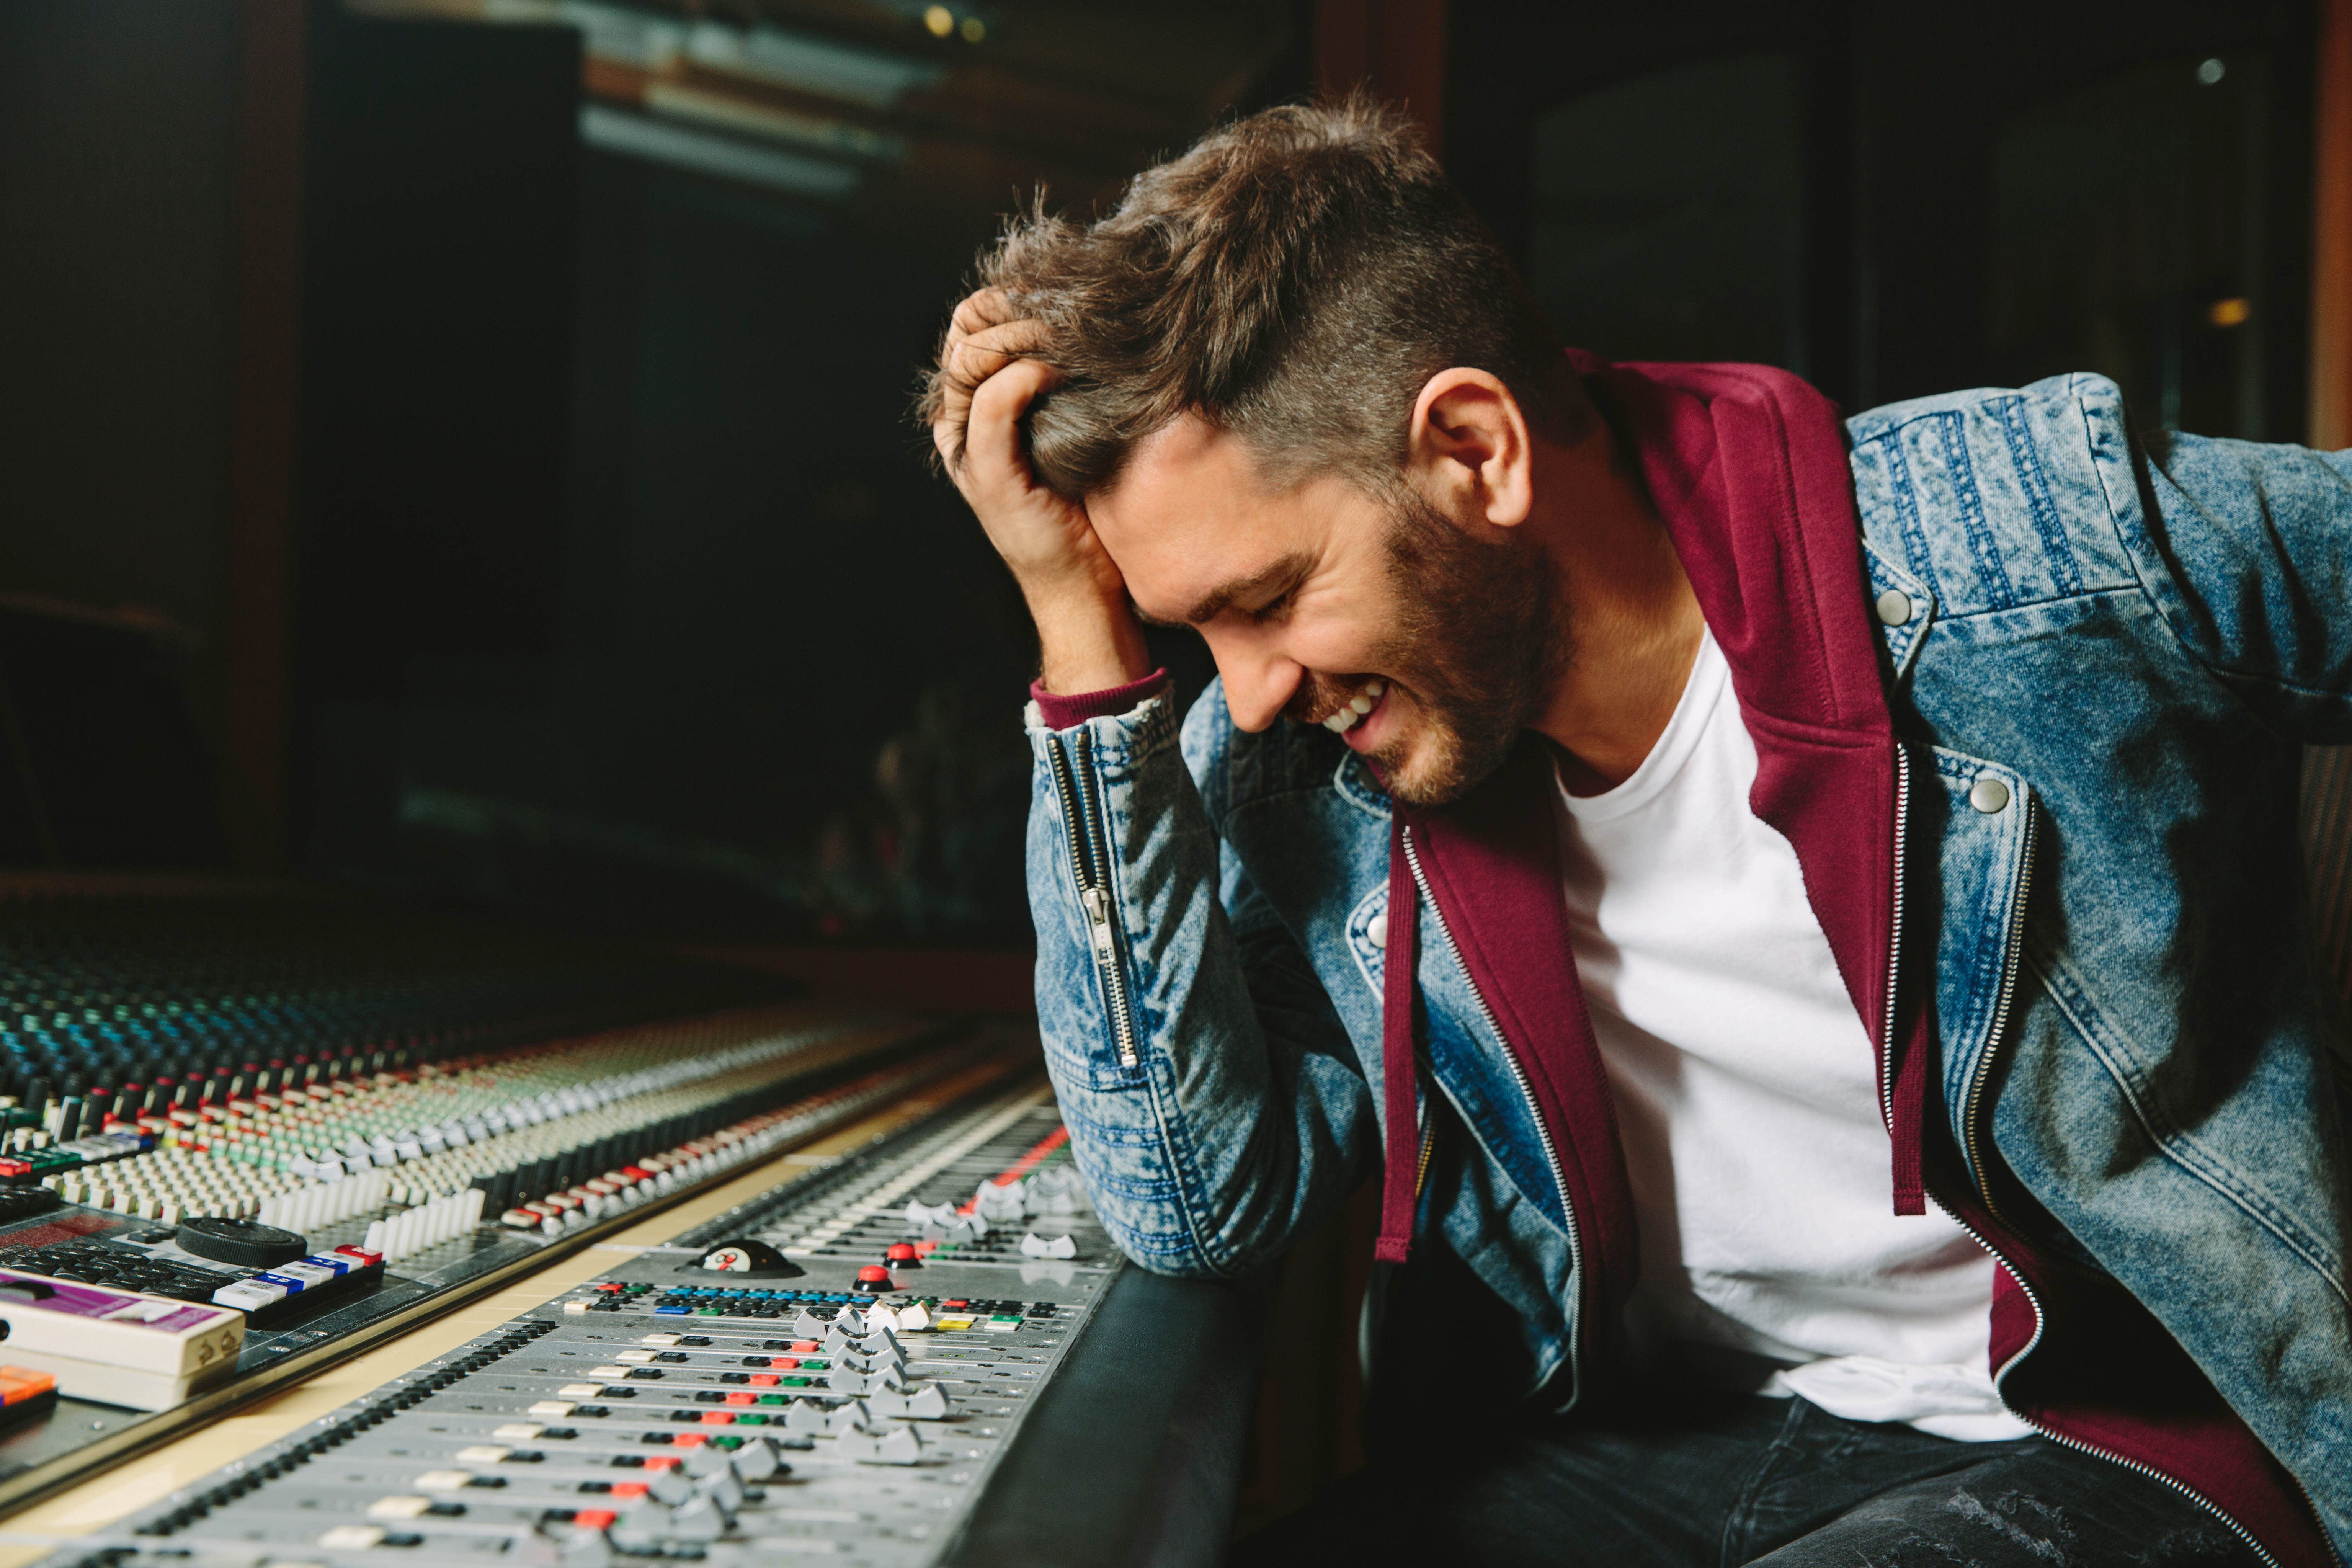 THE GOOD PARTS OF ANDY GRAMMER